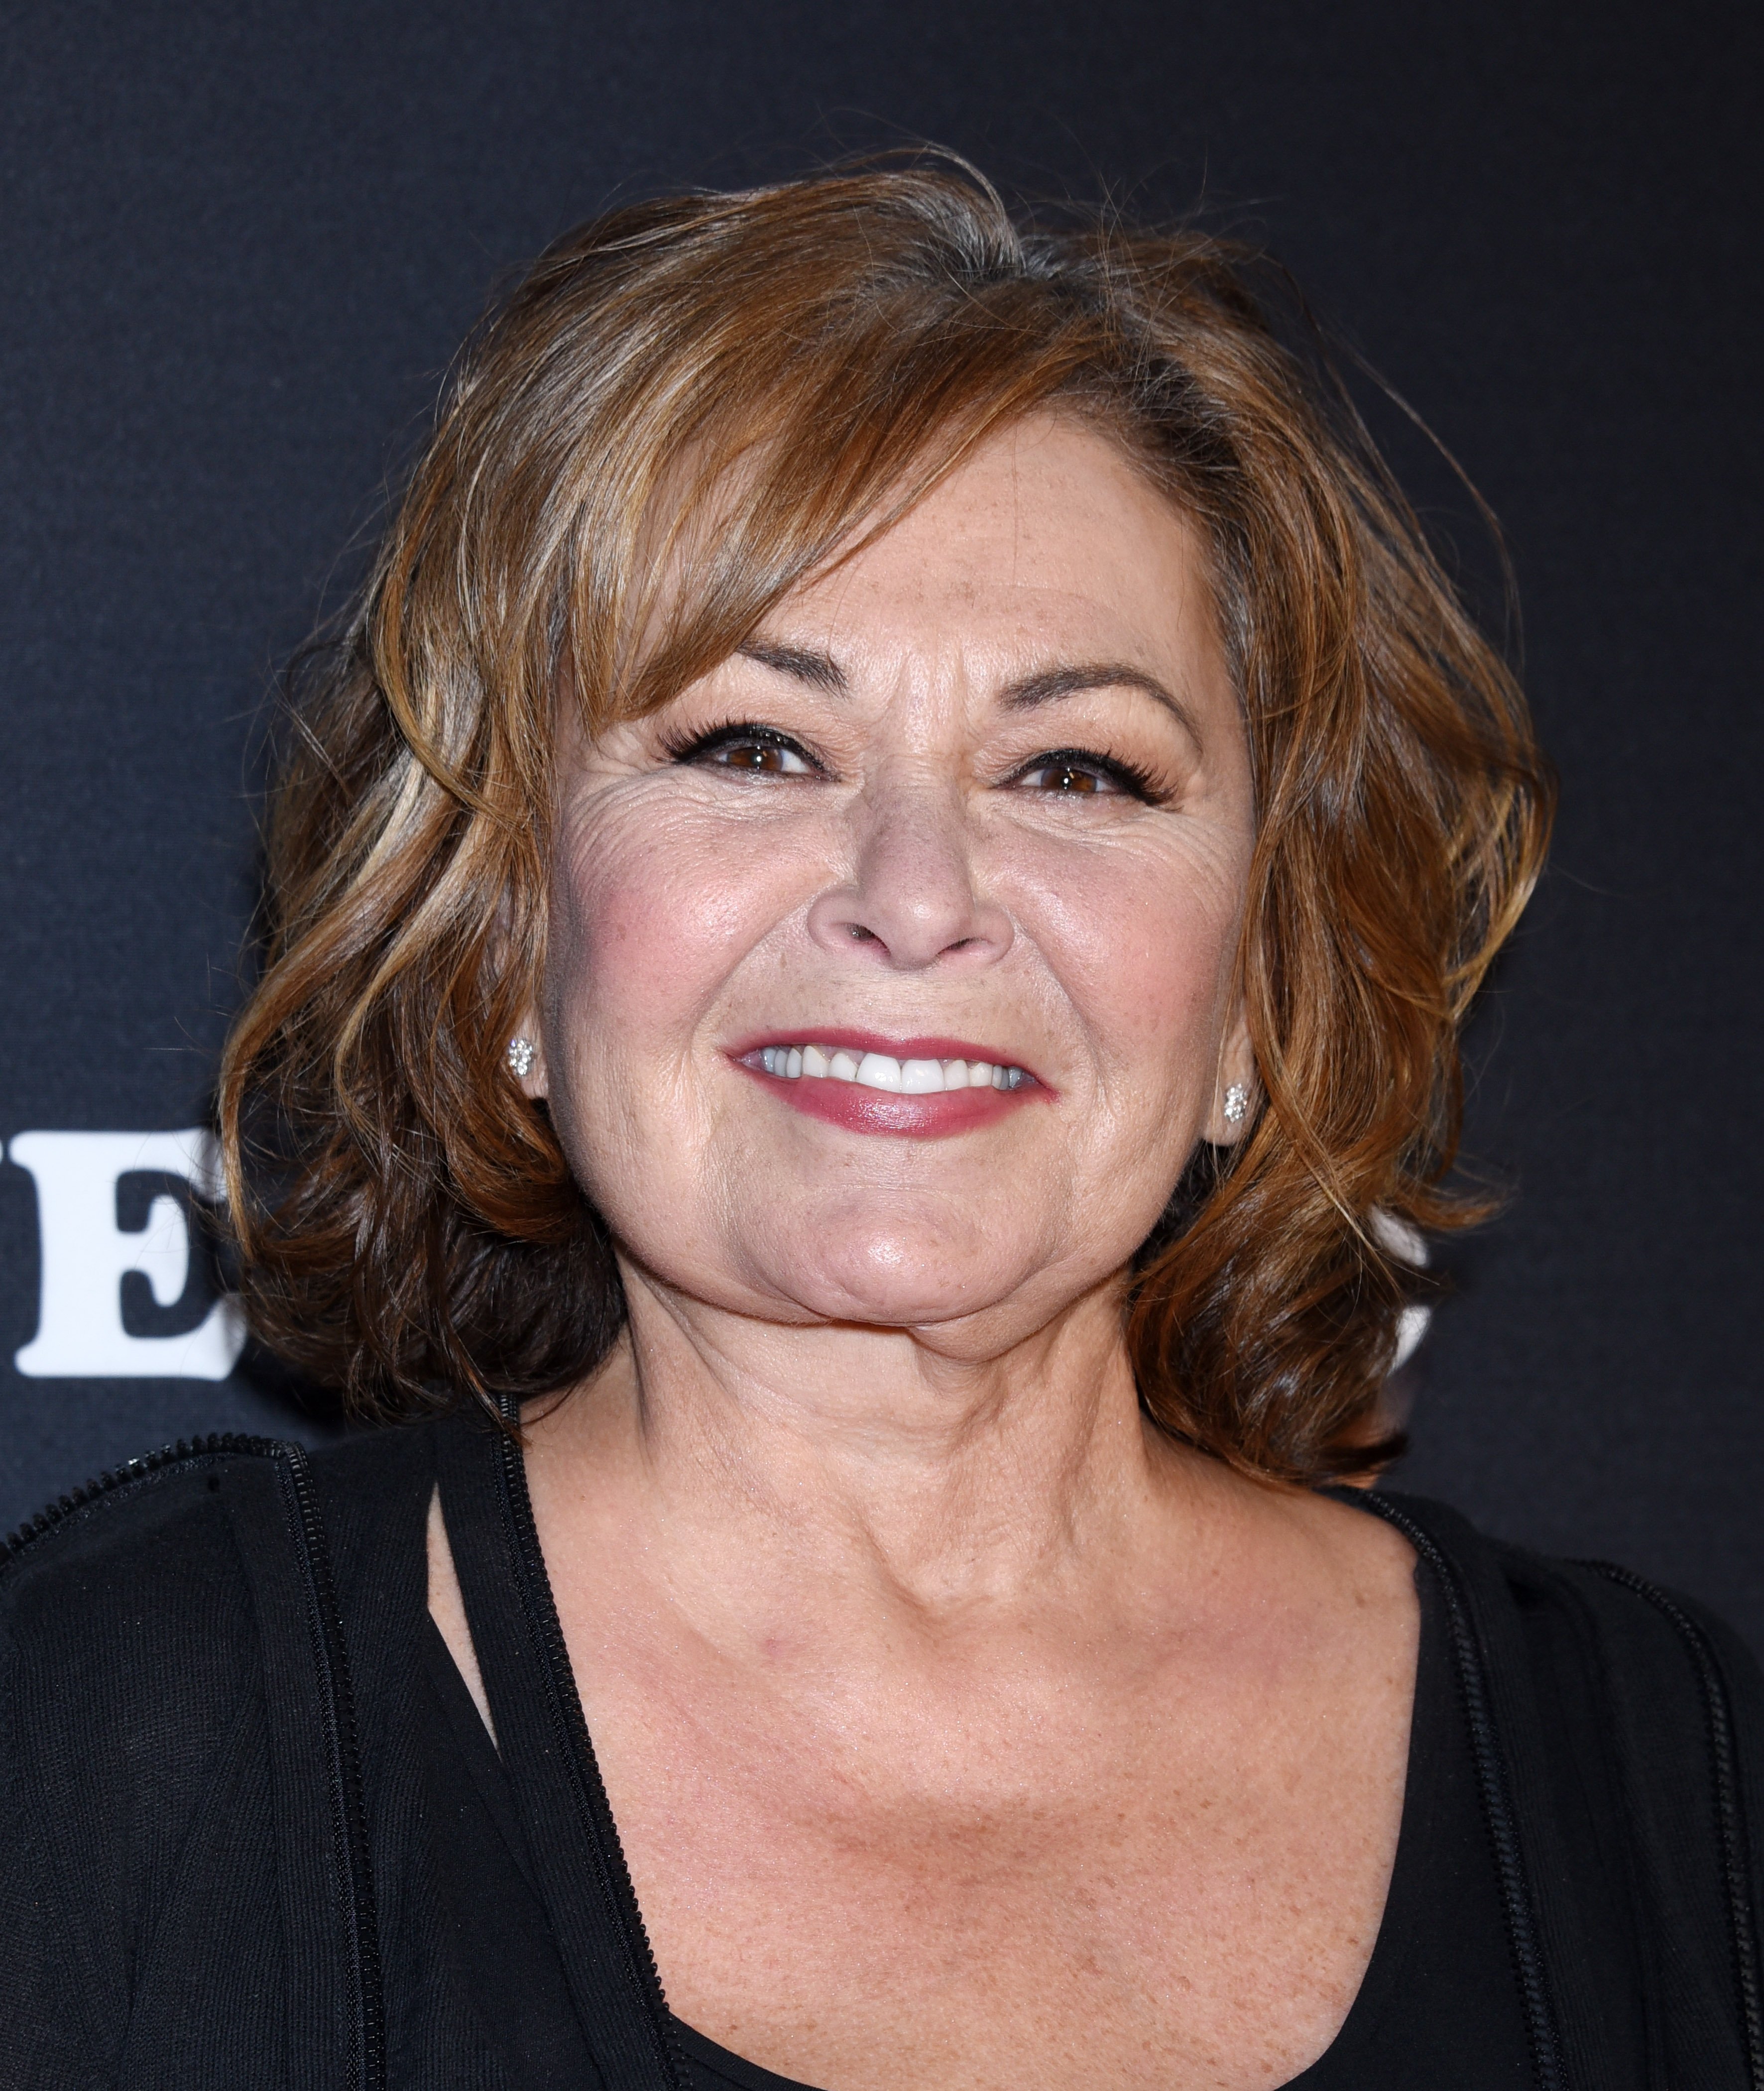 Roseanne Barr arrives to the "Roseanne" series premiere event on March 23, 2018 in Burbank, California | Photo: Shutterstock